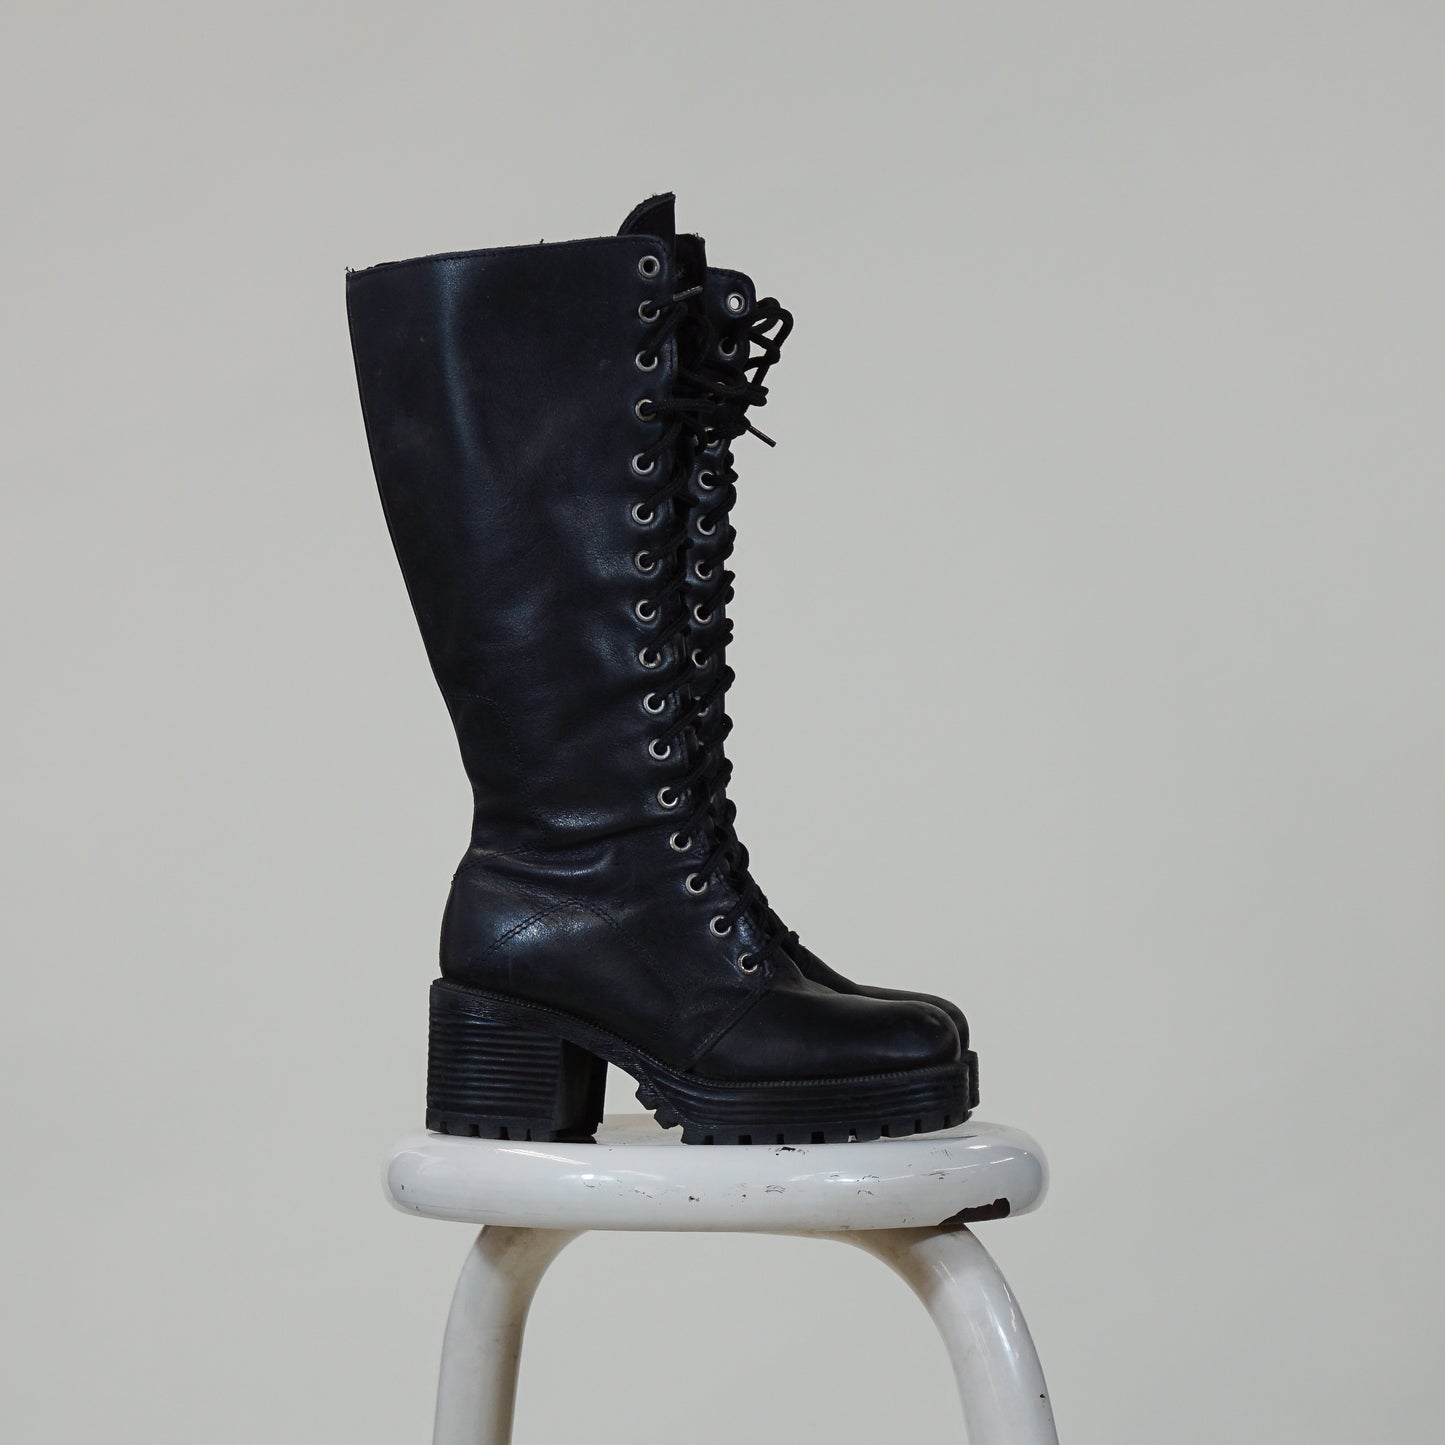 Black Leather Winter Boots Made in Canada (7)